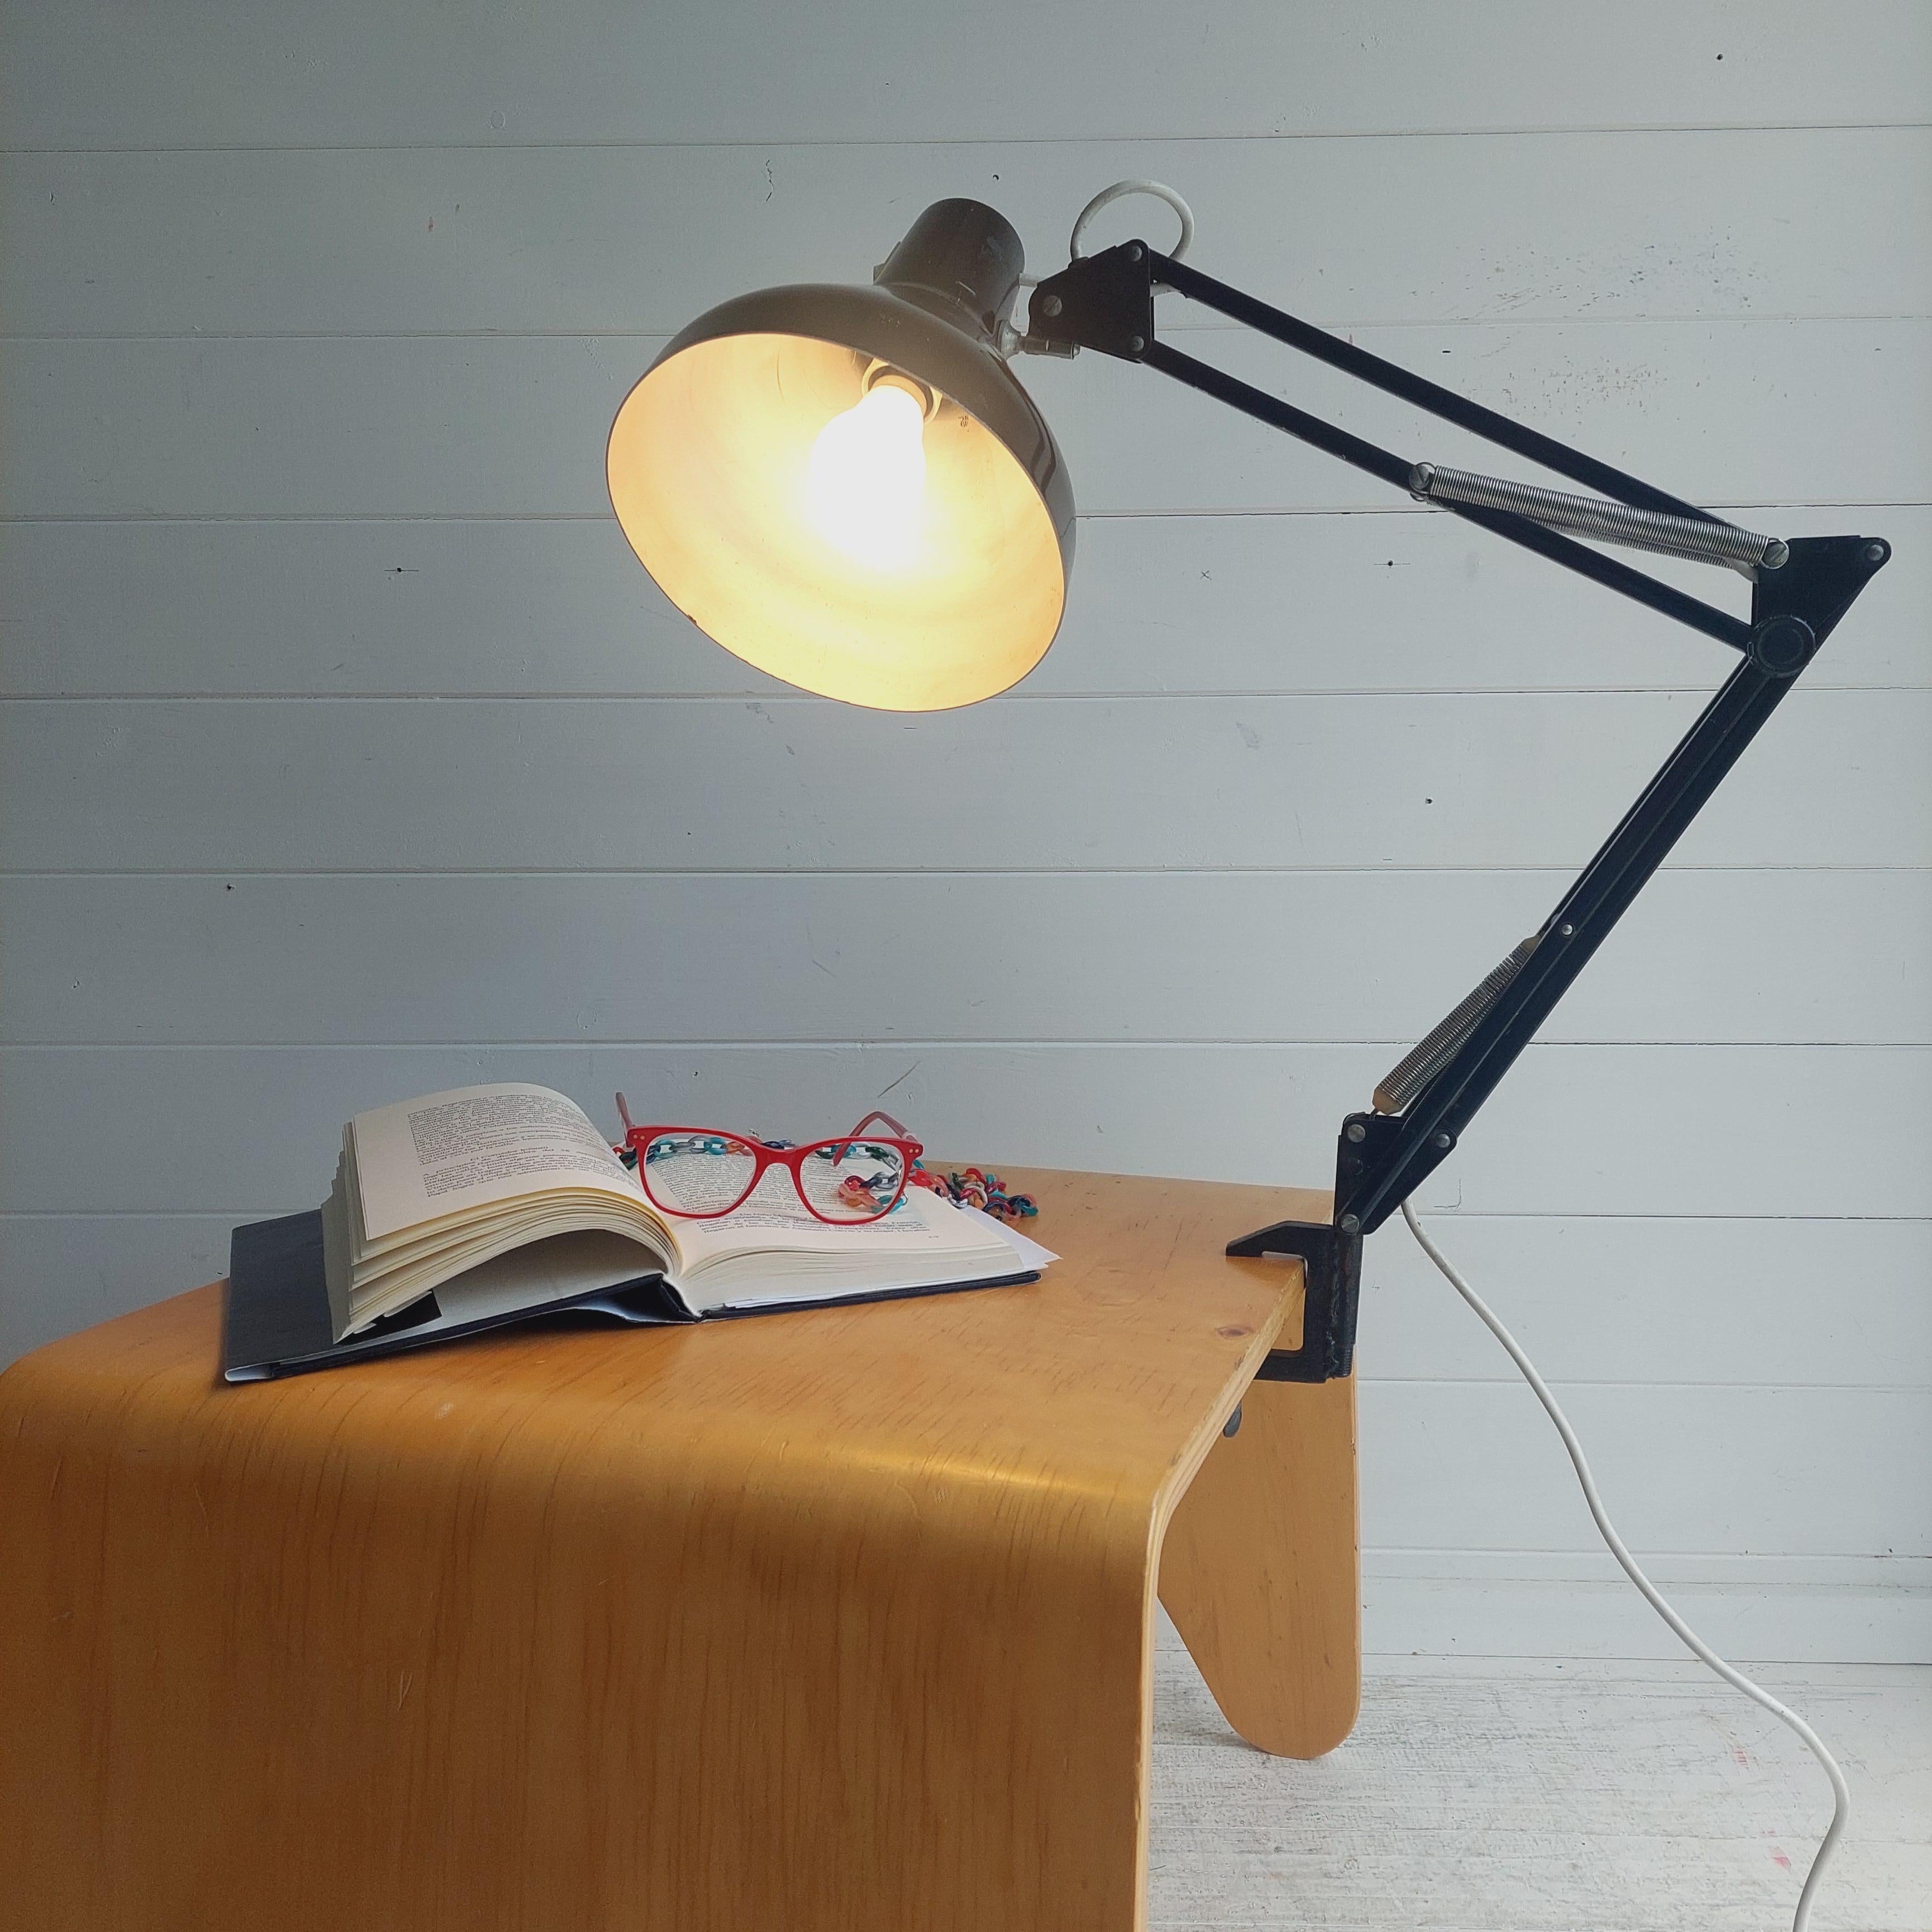 20th Century Mid Century Herbert Terry & Sons Ltd Black Anglepoise Desk/Wall Clamp Lamp, 60s For Sale